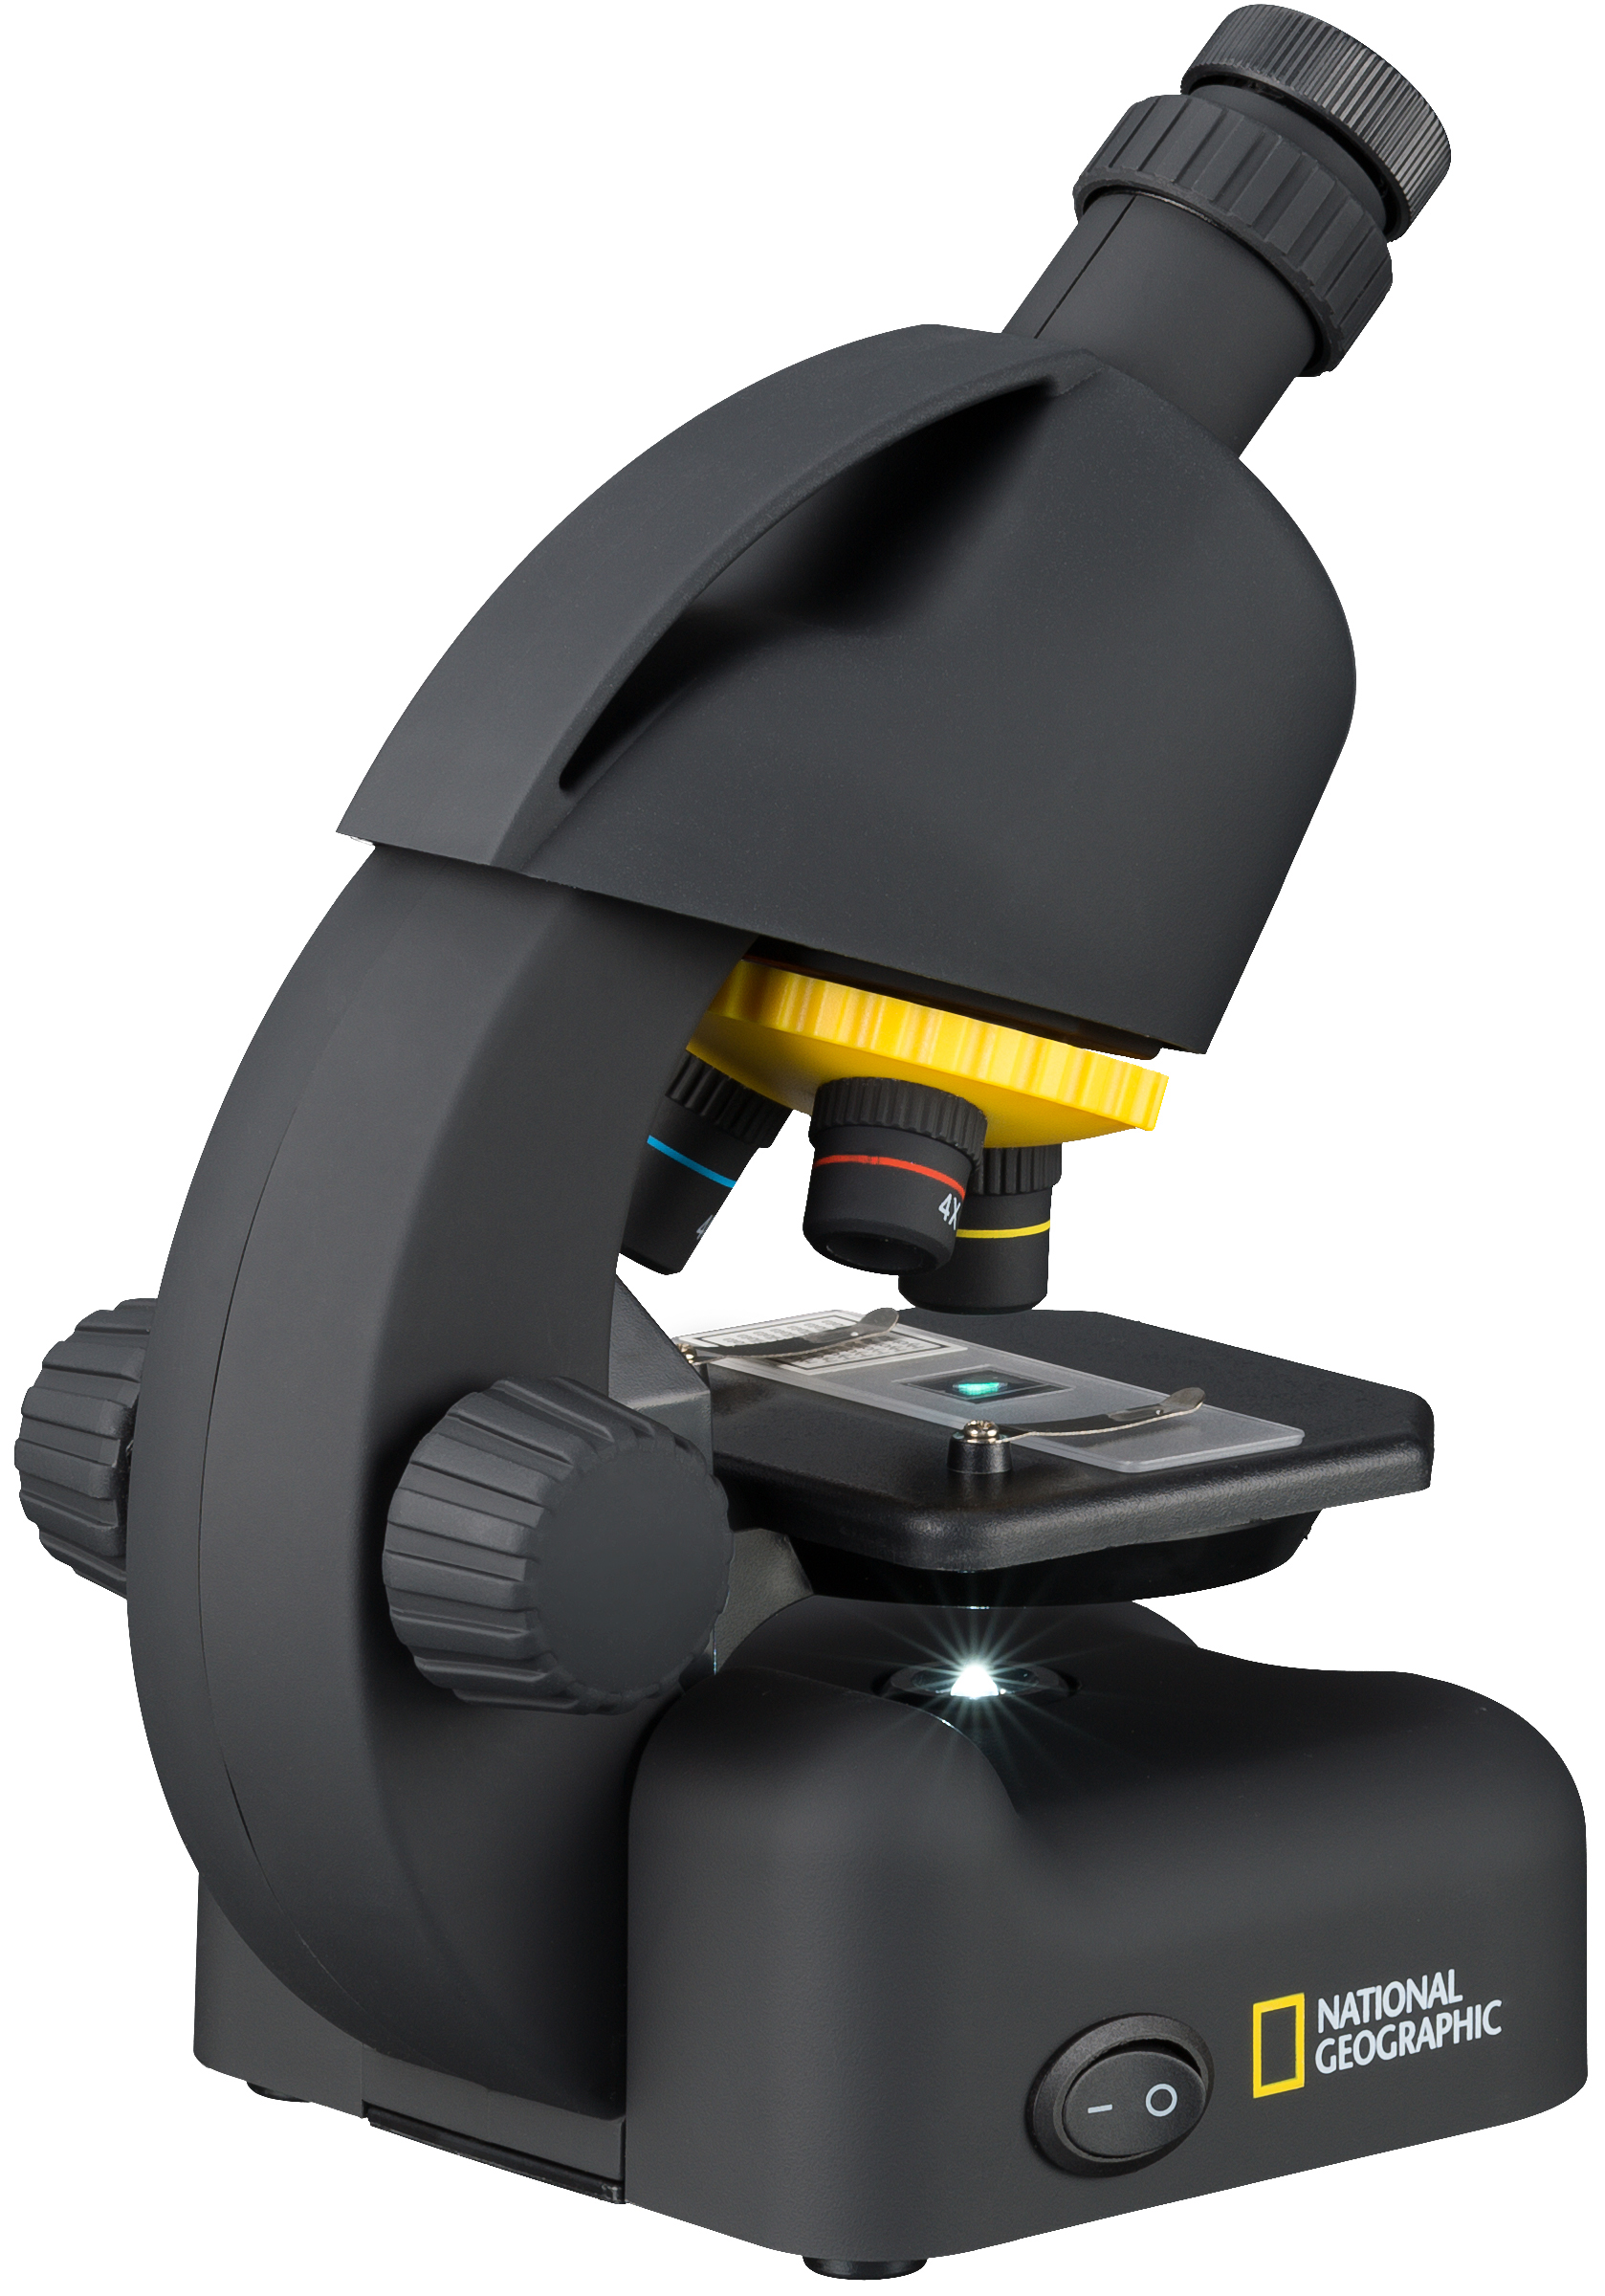 NATIONAL GEOGRAPHIC 40-640x Microscope avec Adaptateur pour Smartphone